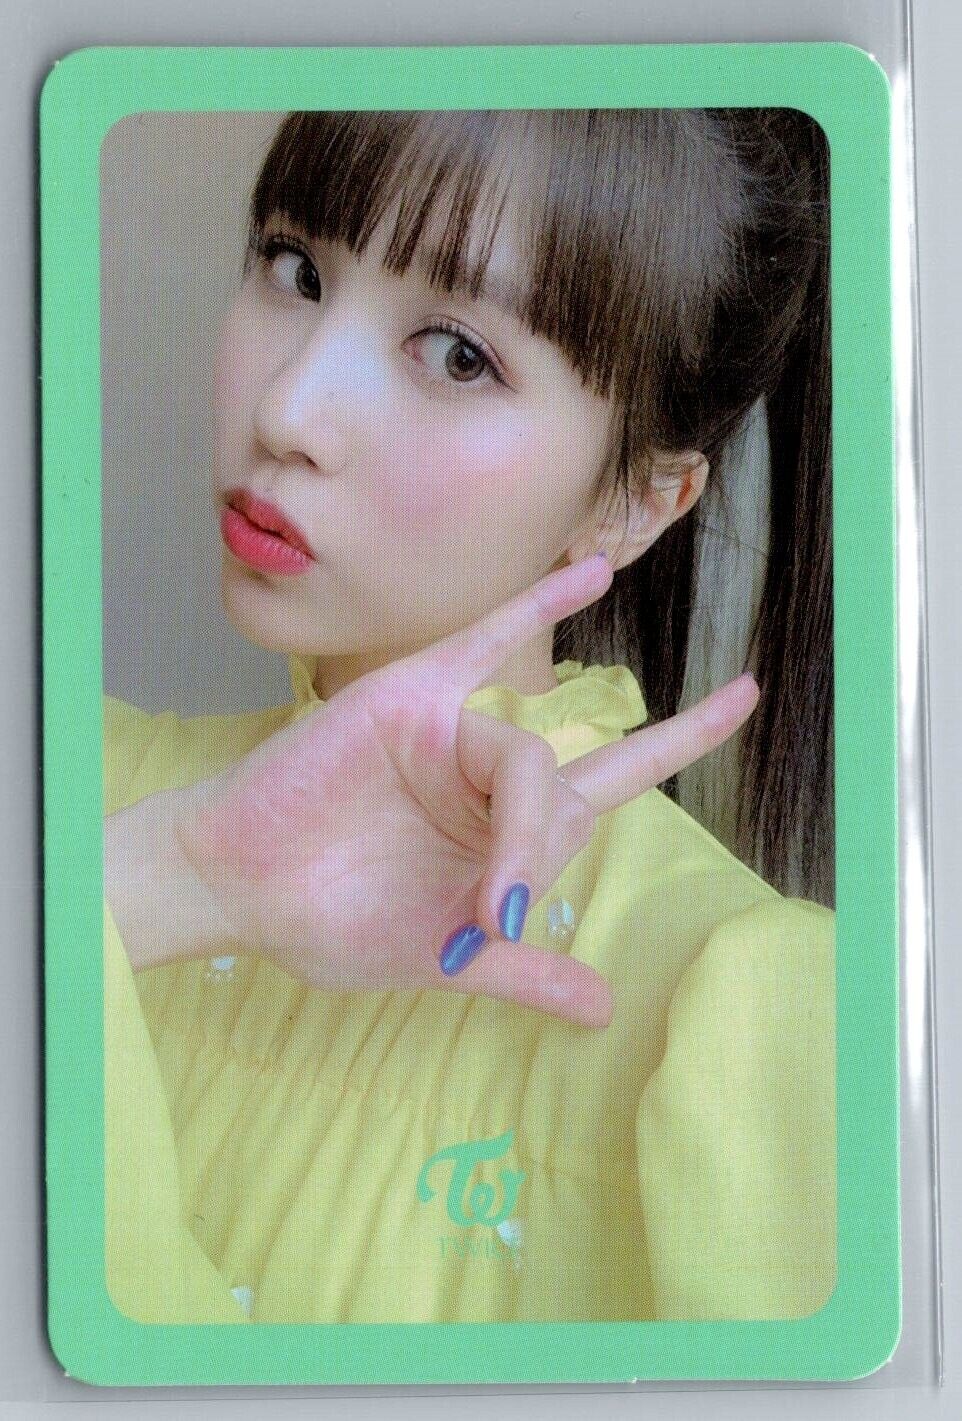 TWICE- MINA FANCY YOU OFFICIAL ALBUM PHOTOCARD (US SELLER)